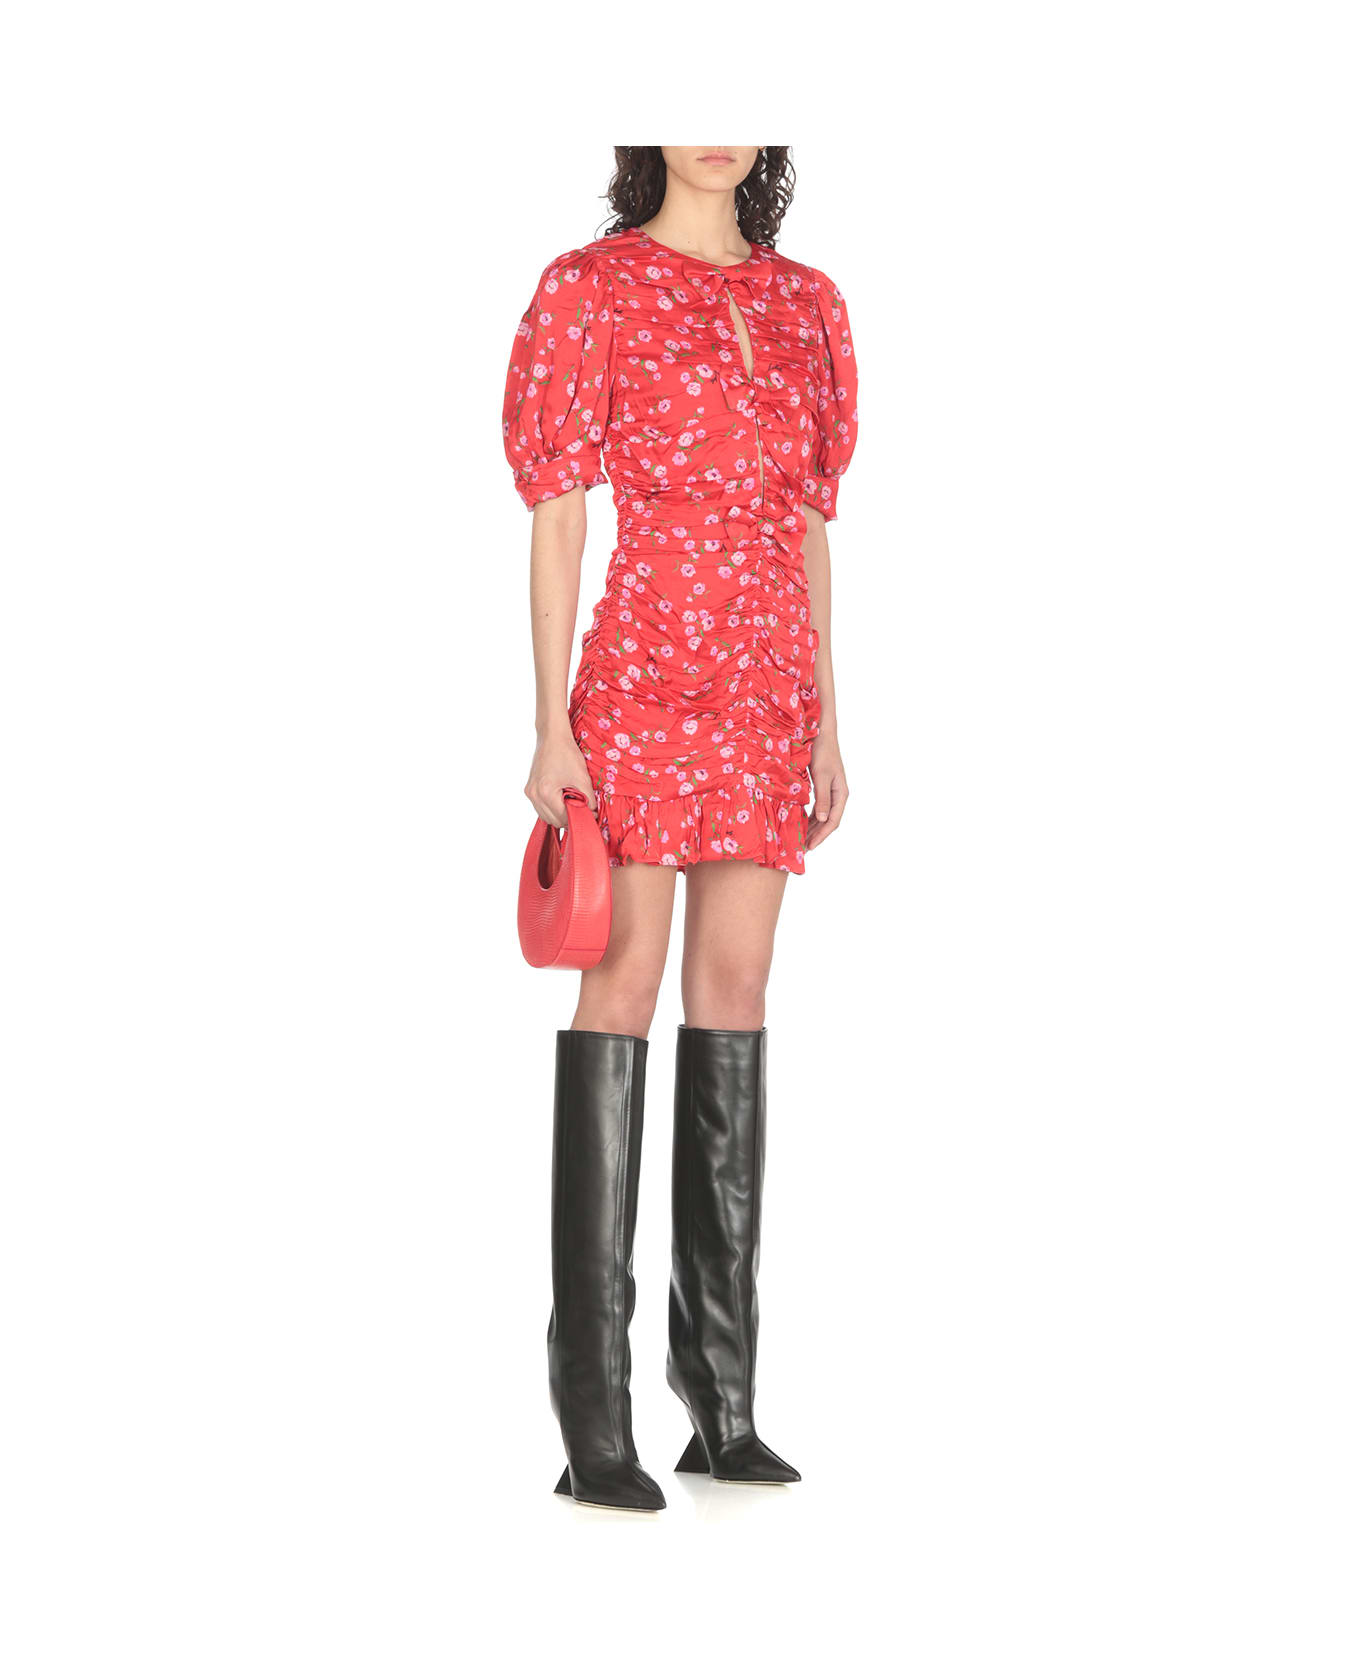 Rotate by Birger Christensen Fitted Mini Dress - Red